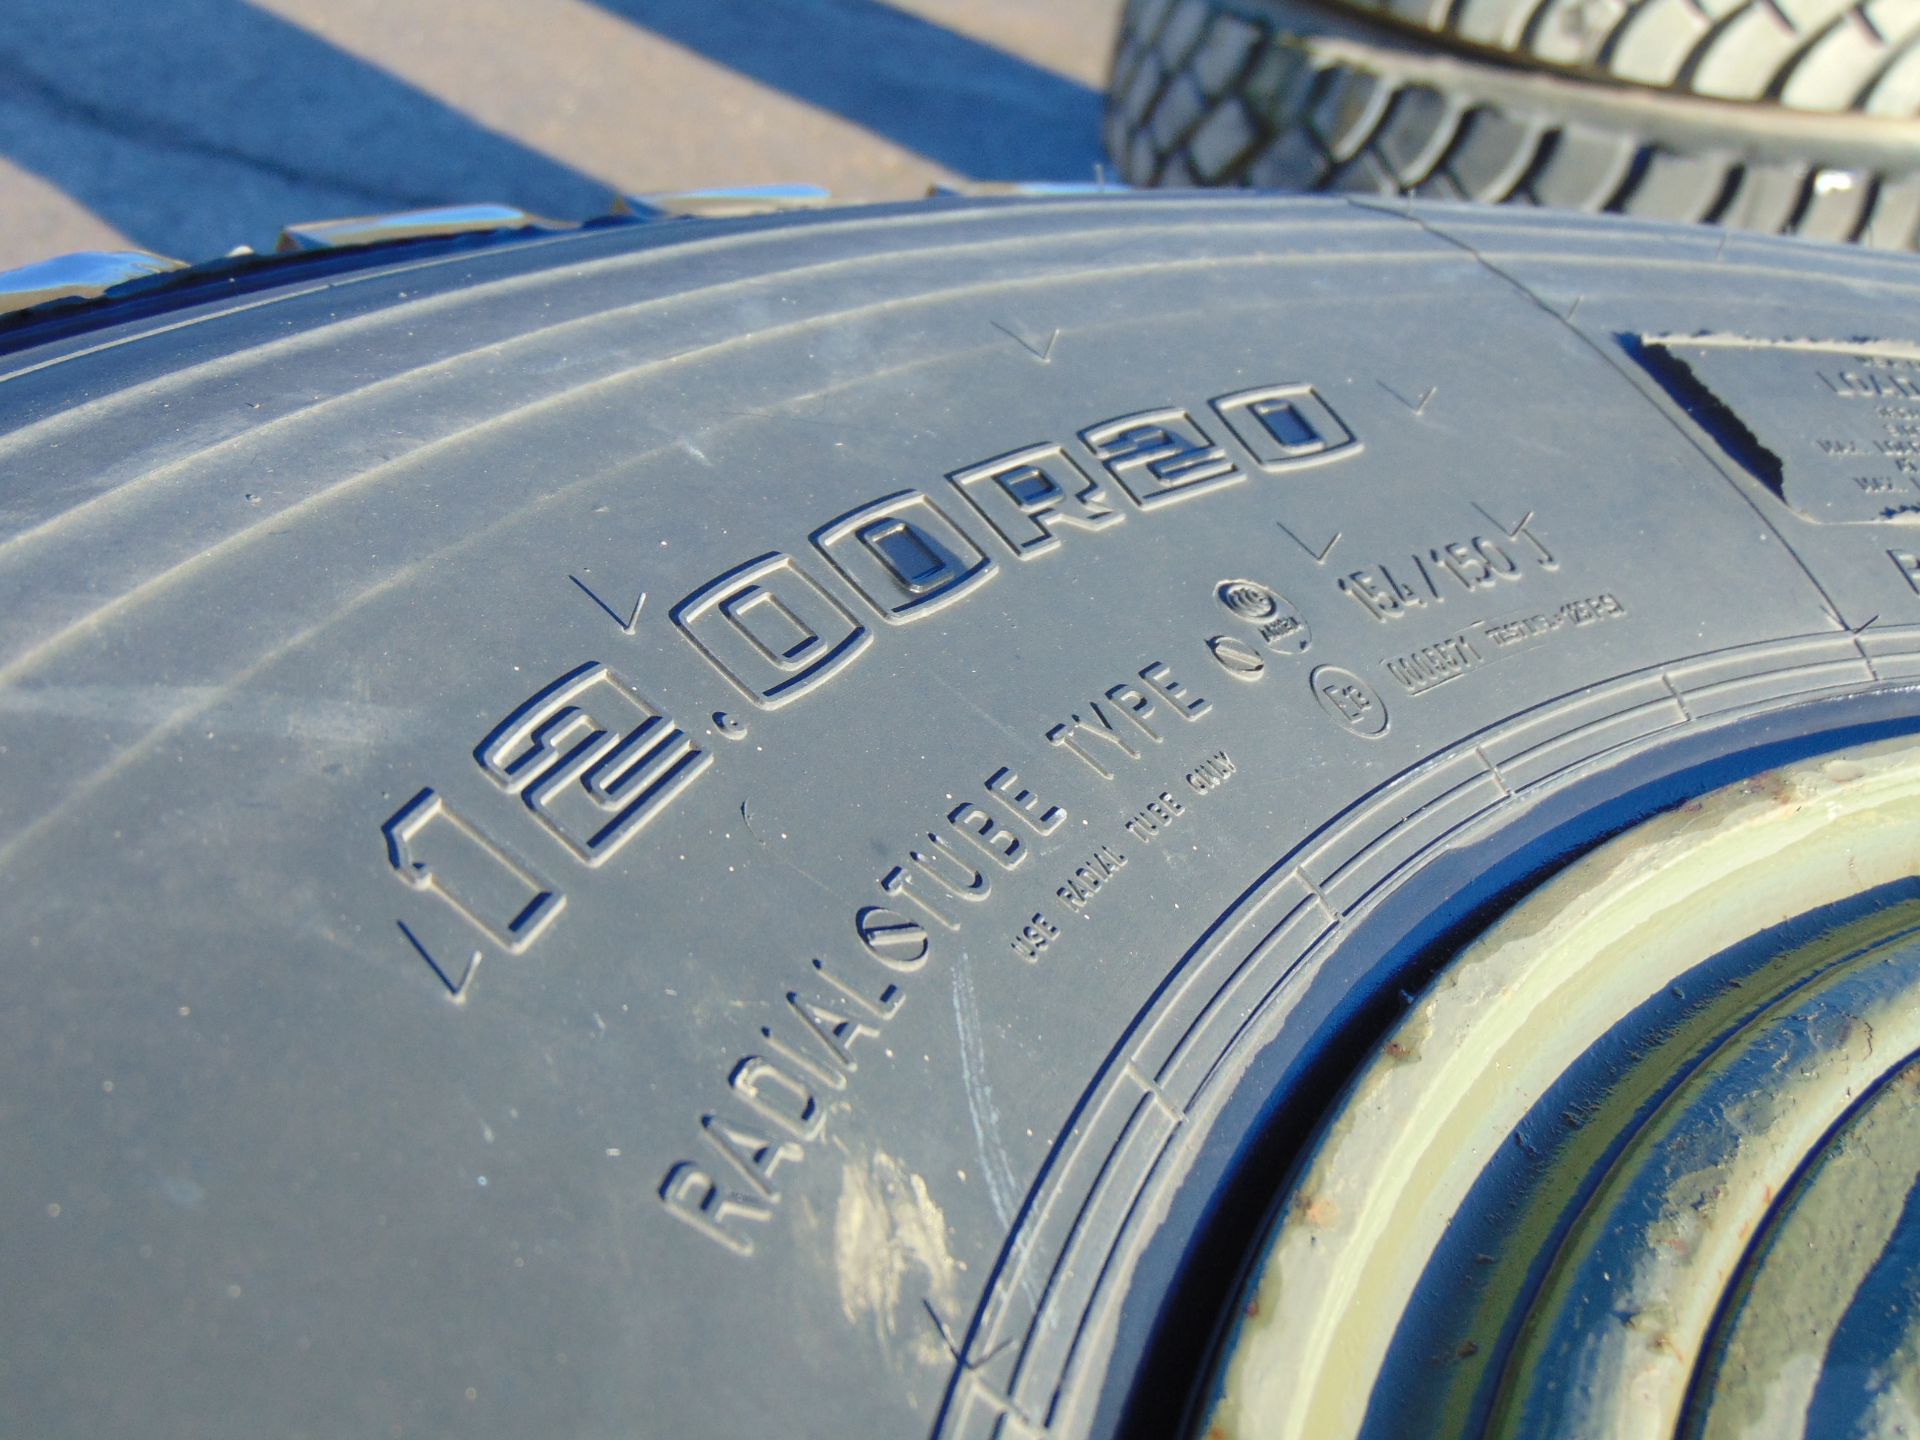 Qty 4 x Goodyear 12.00R20 G388 Unisteel tyres, unused still with bobbles fitted on 8 stud rims - Image 8 of 8